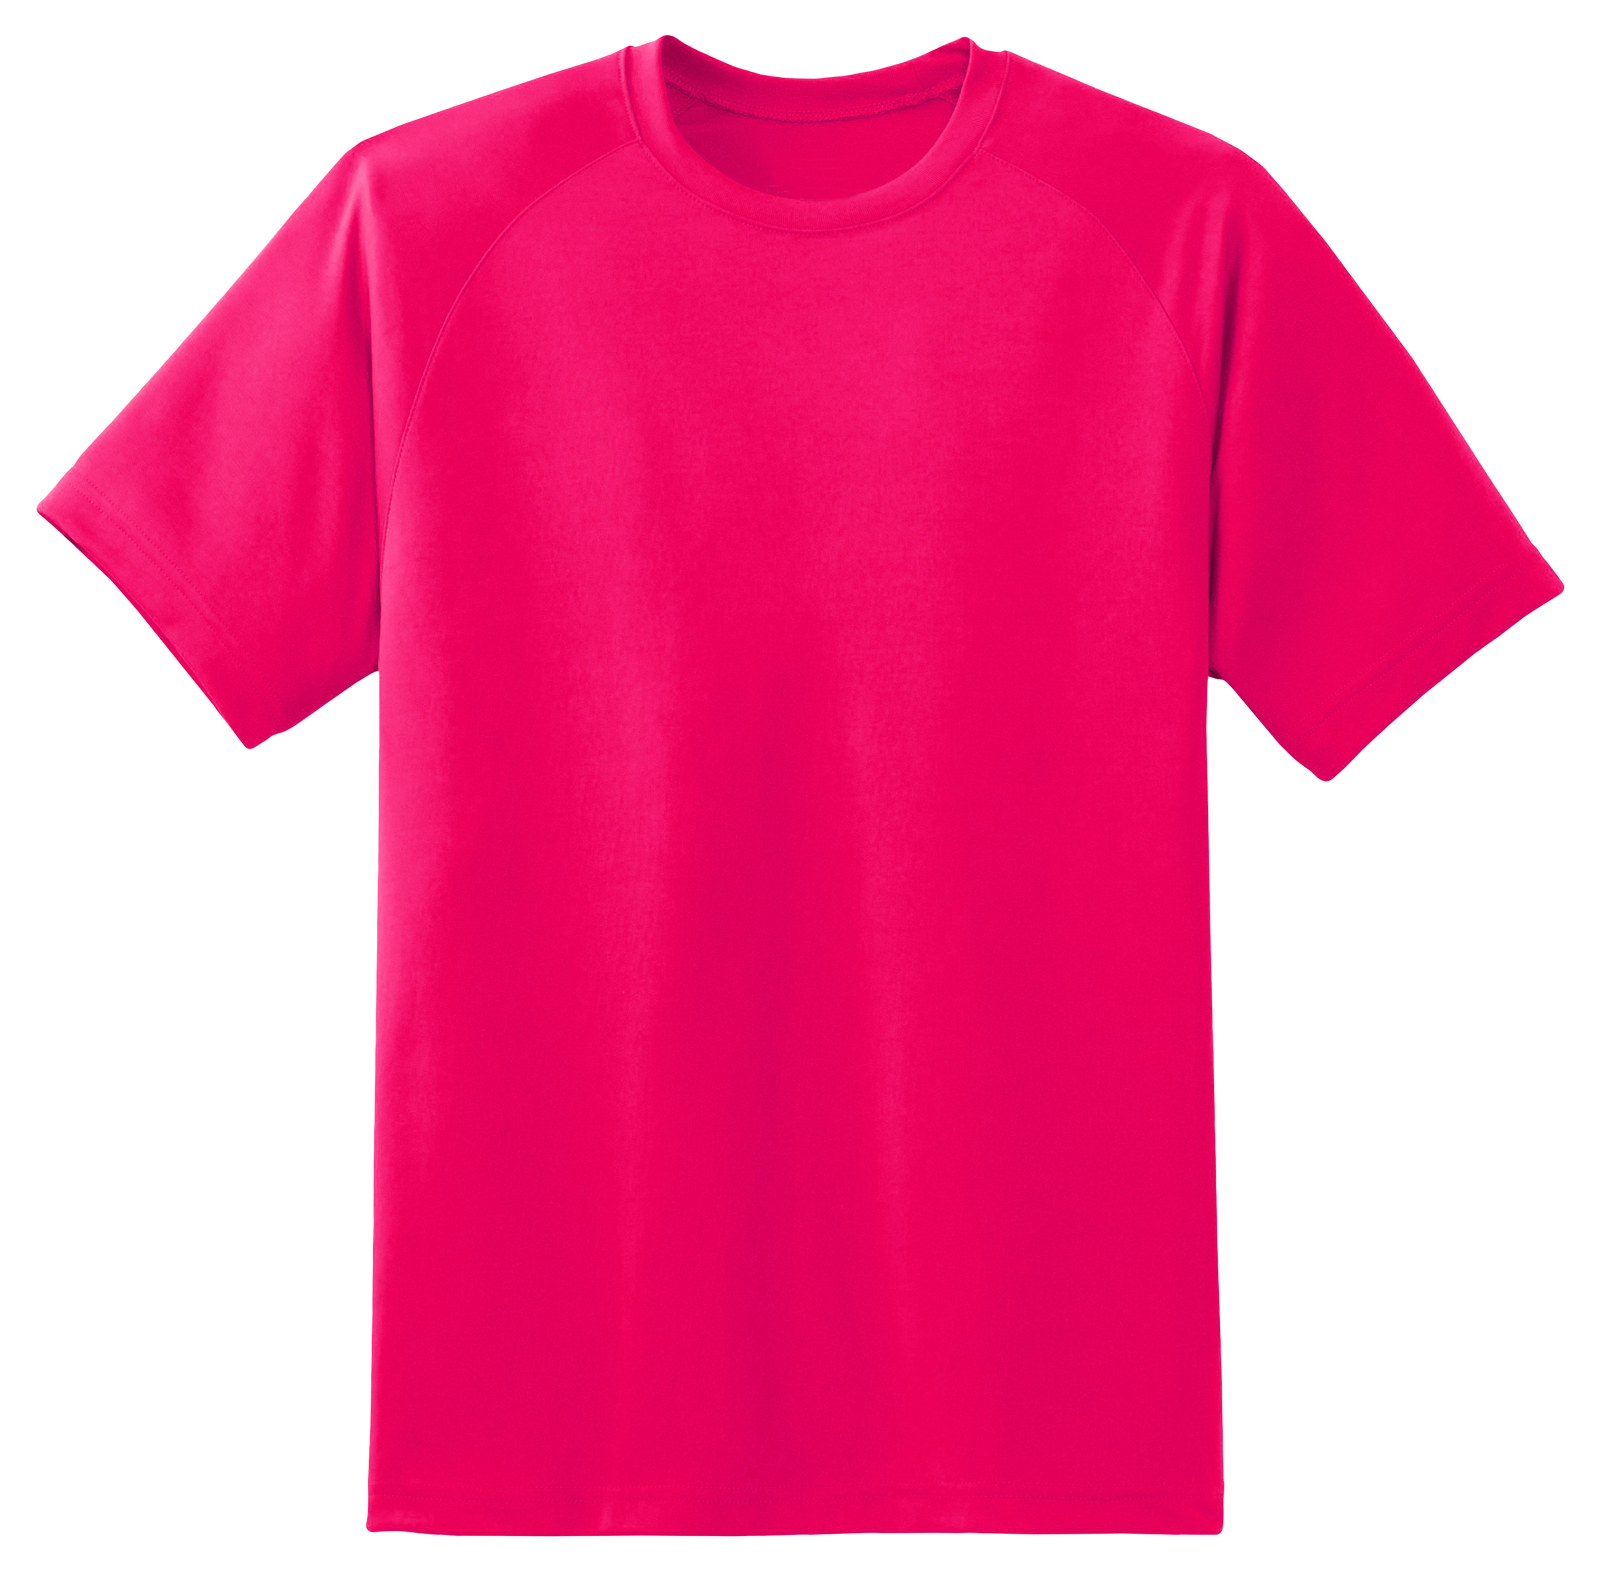 A Pink Shirt On A Black Background